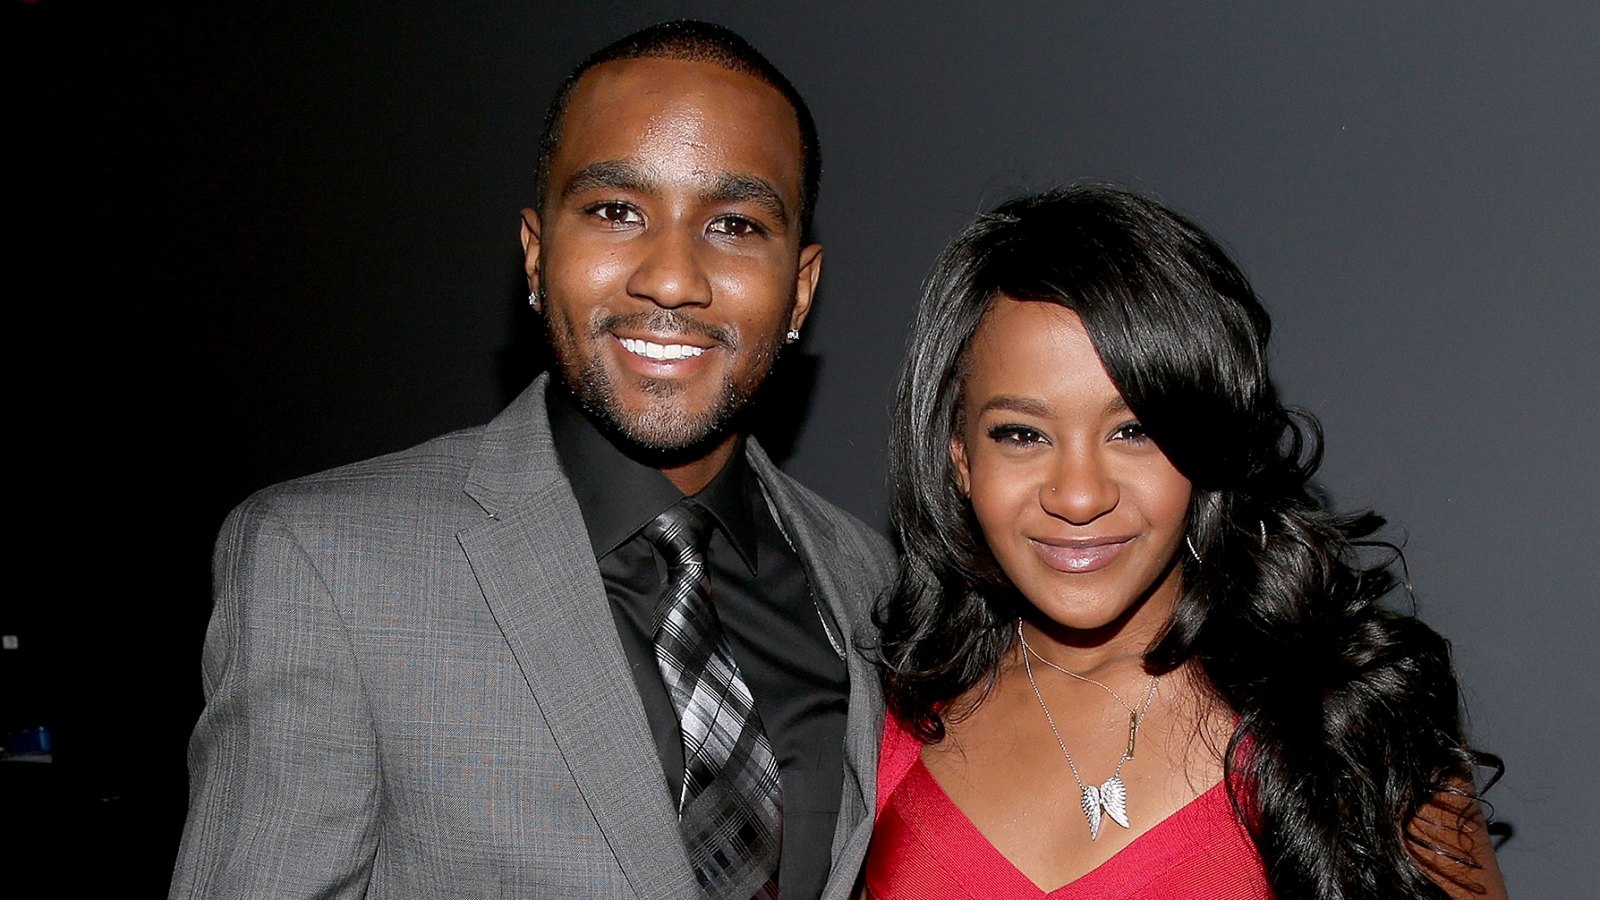 Nick Gordon and Bobbi Kristina Brown attend "We Will Always Love You: A GRAMMY Salute to Whitney Houston" at Nokia Theatre L.A. Live on October 11, 2012.